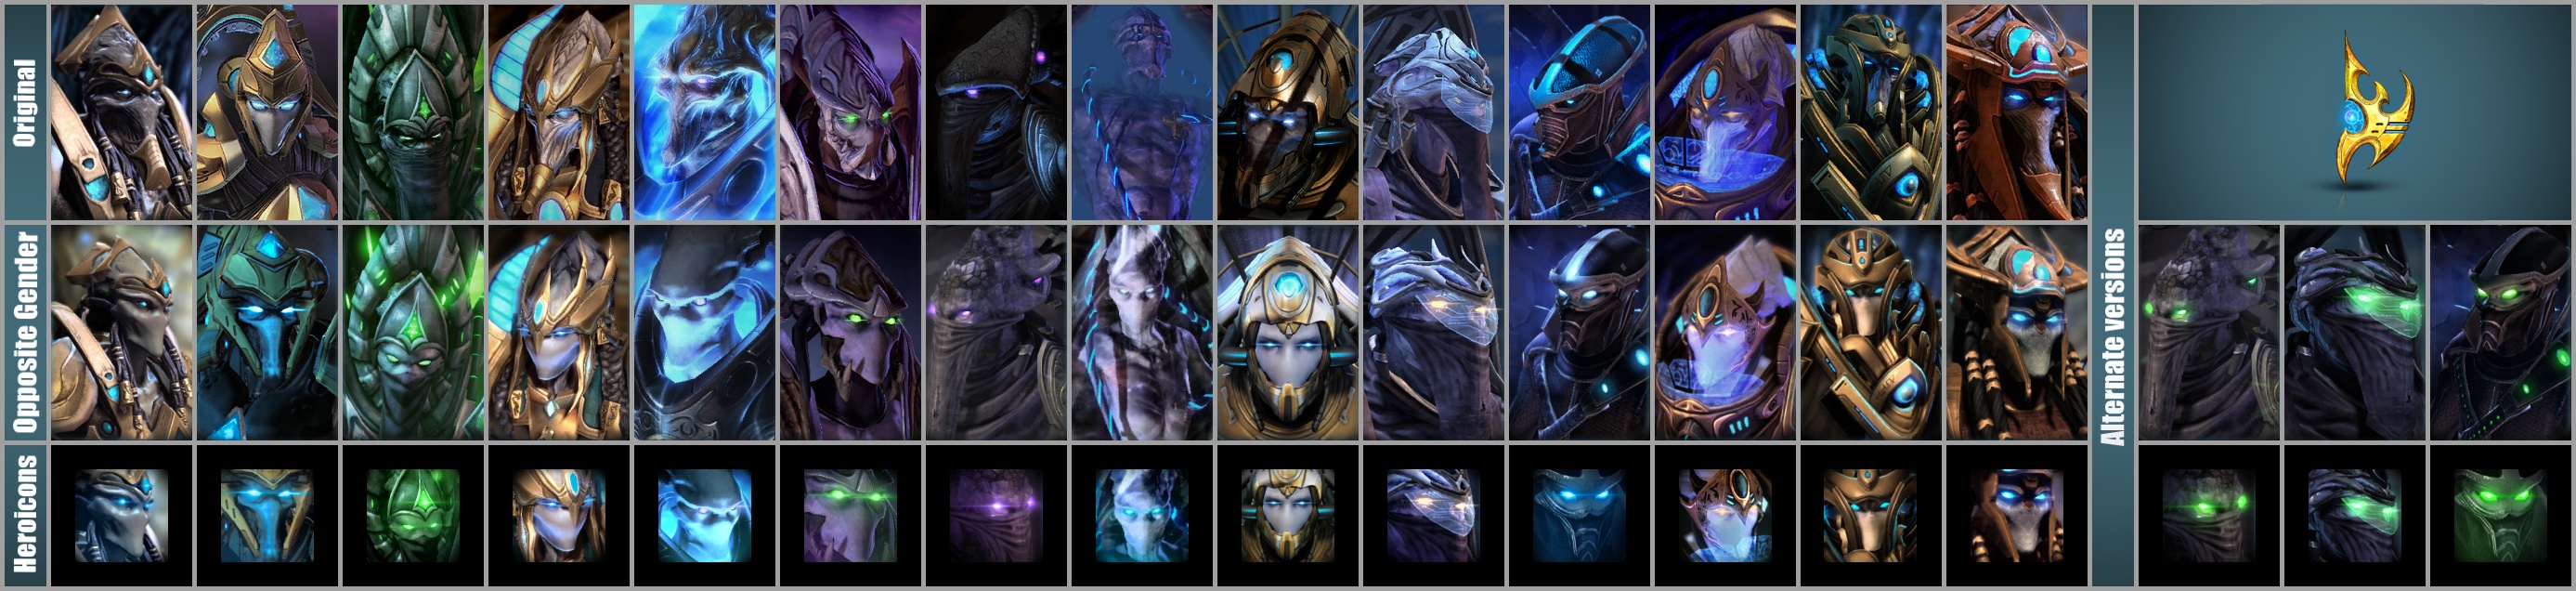 Gender Swapped Protoss Multiplayer units - Portraits